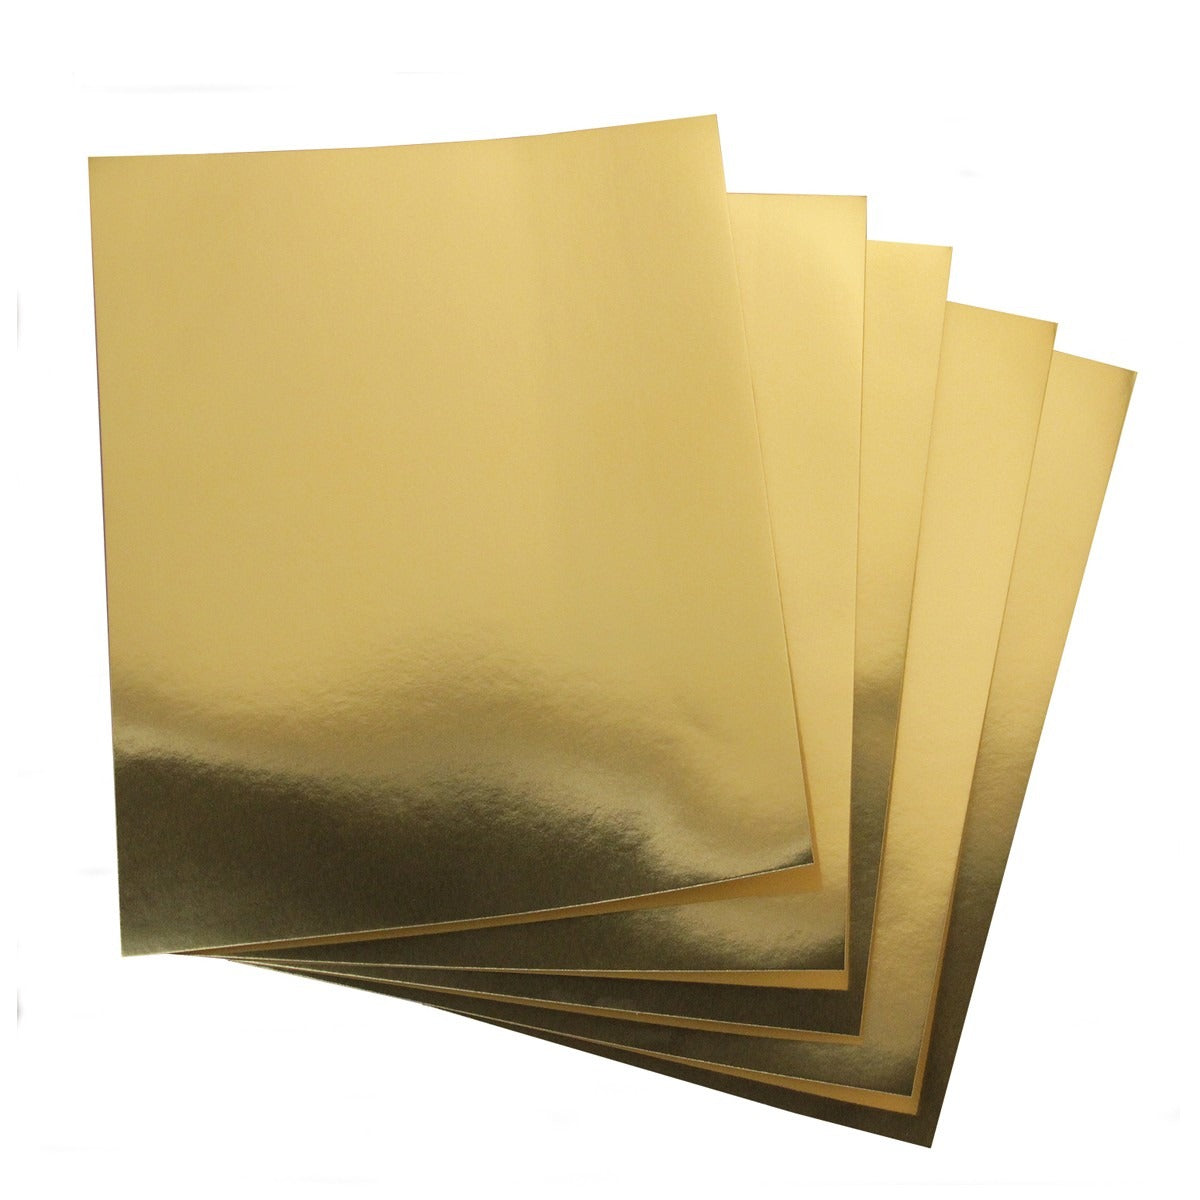 Metallic Foil Board 10 Sheets 8.5" x 11" 5 Ea. Gold and Silver